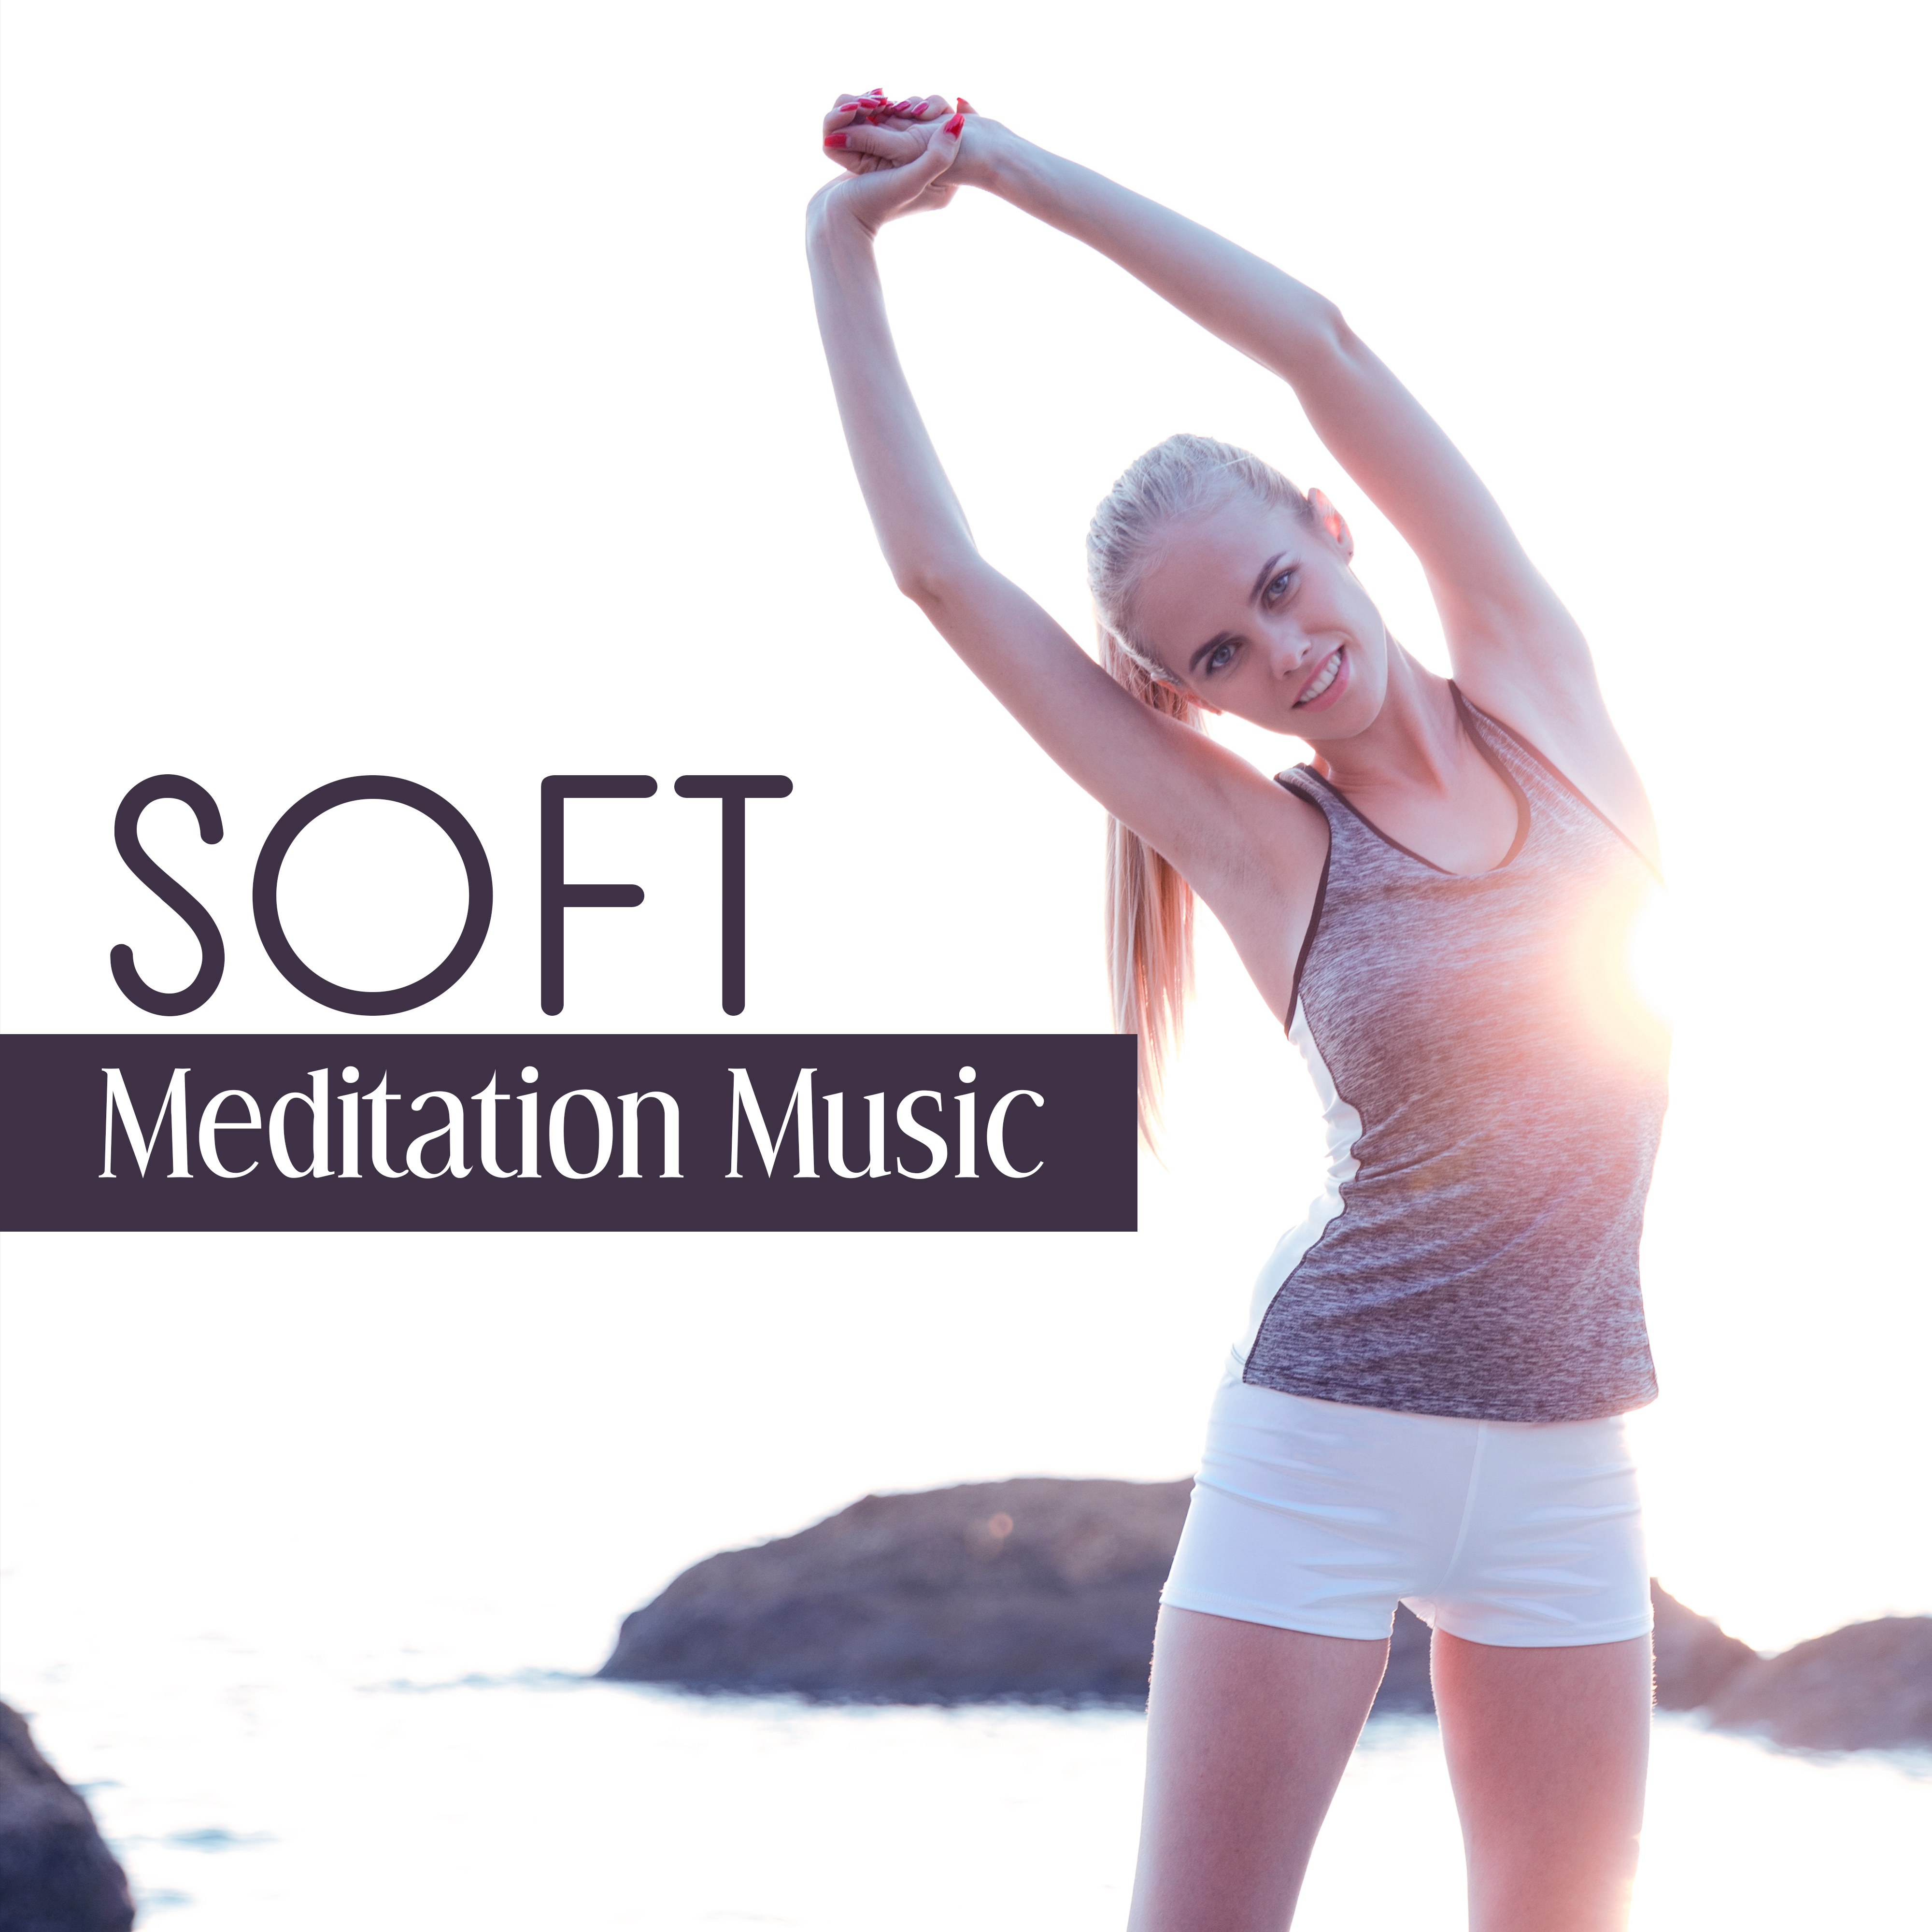 Soft Meditation Music – Calm Sounds to Meditate, Buddha Lounge, Relaxing Melodies